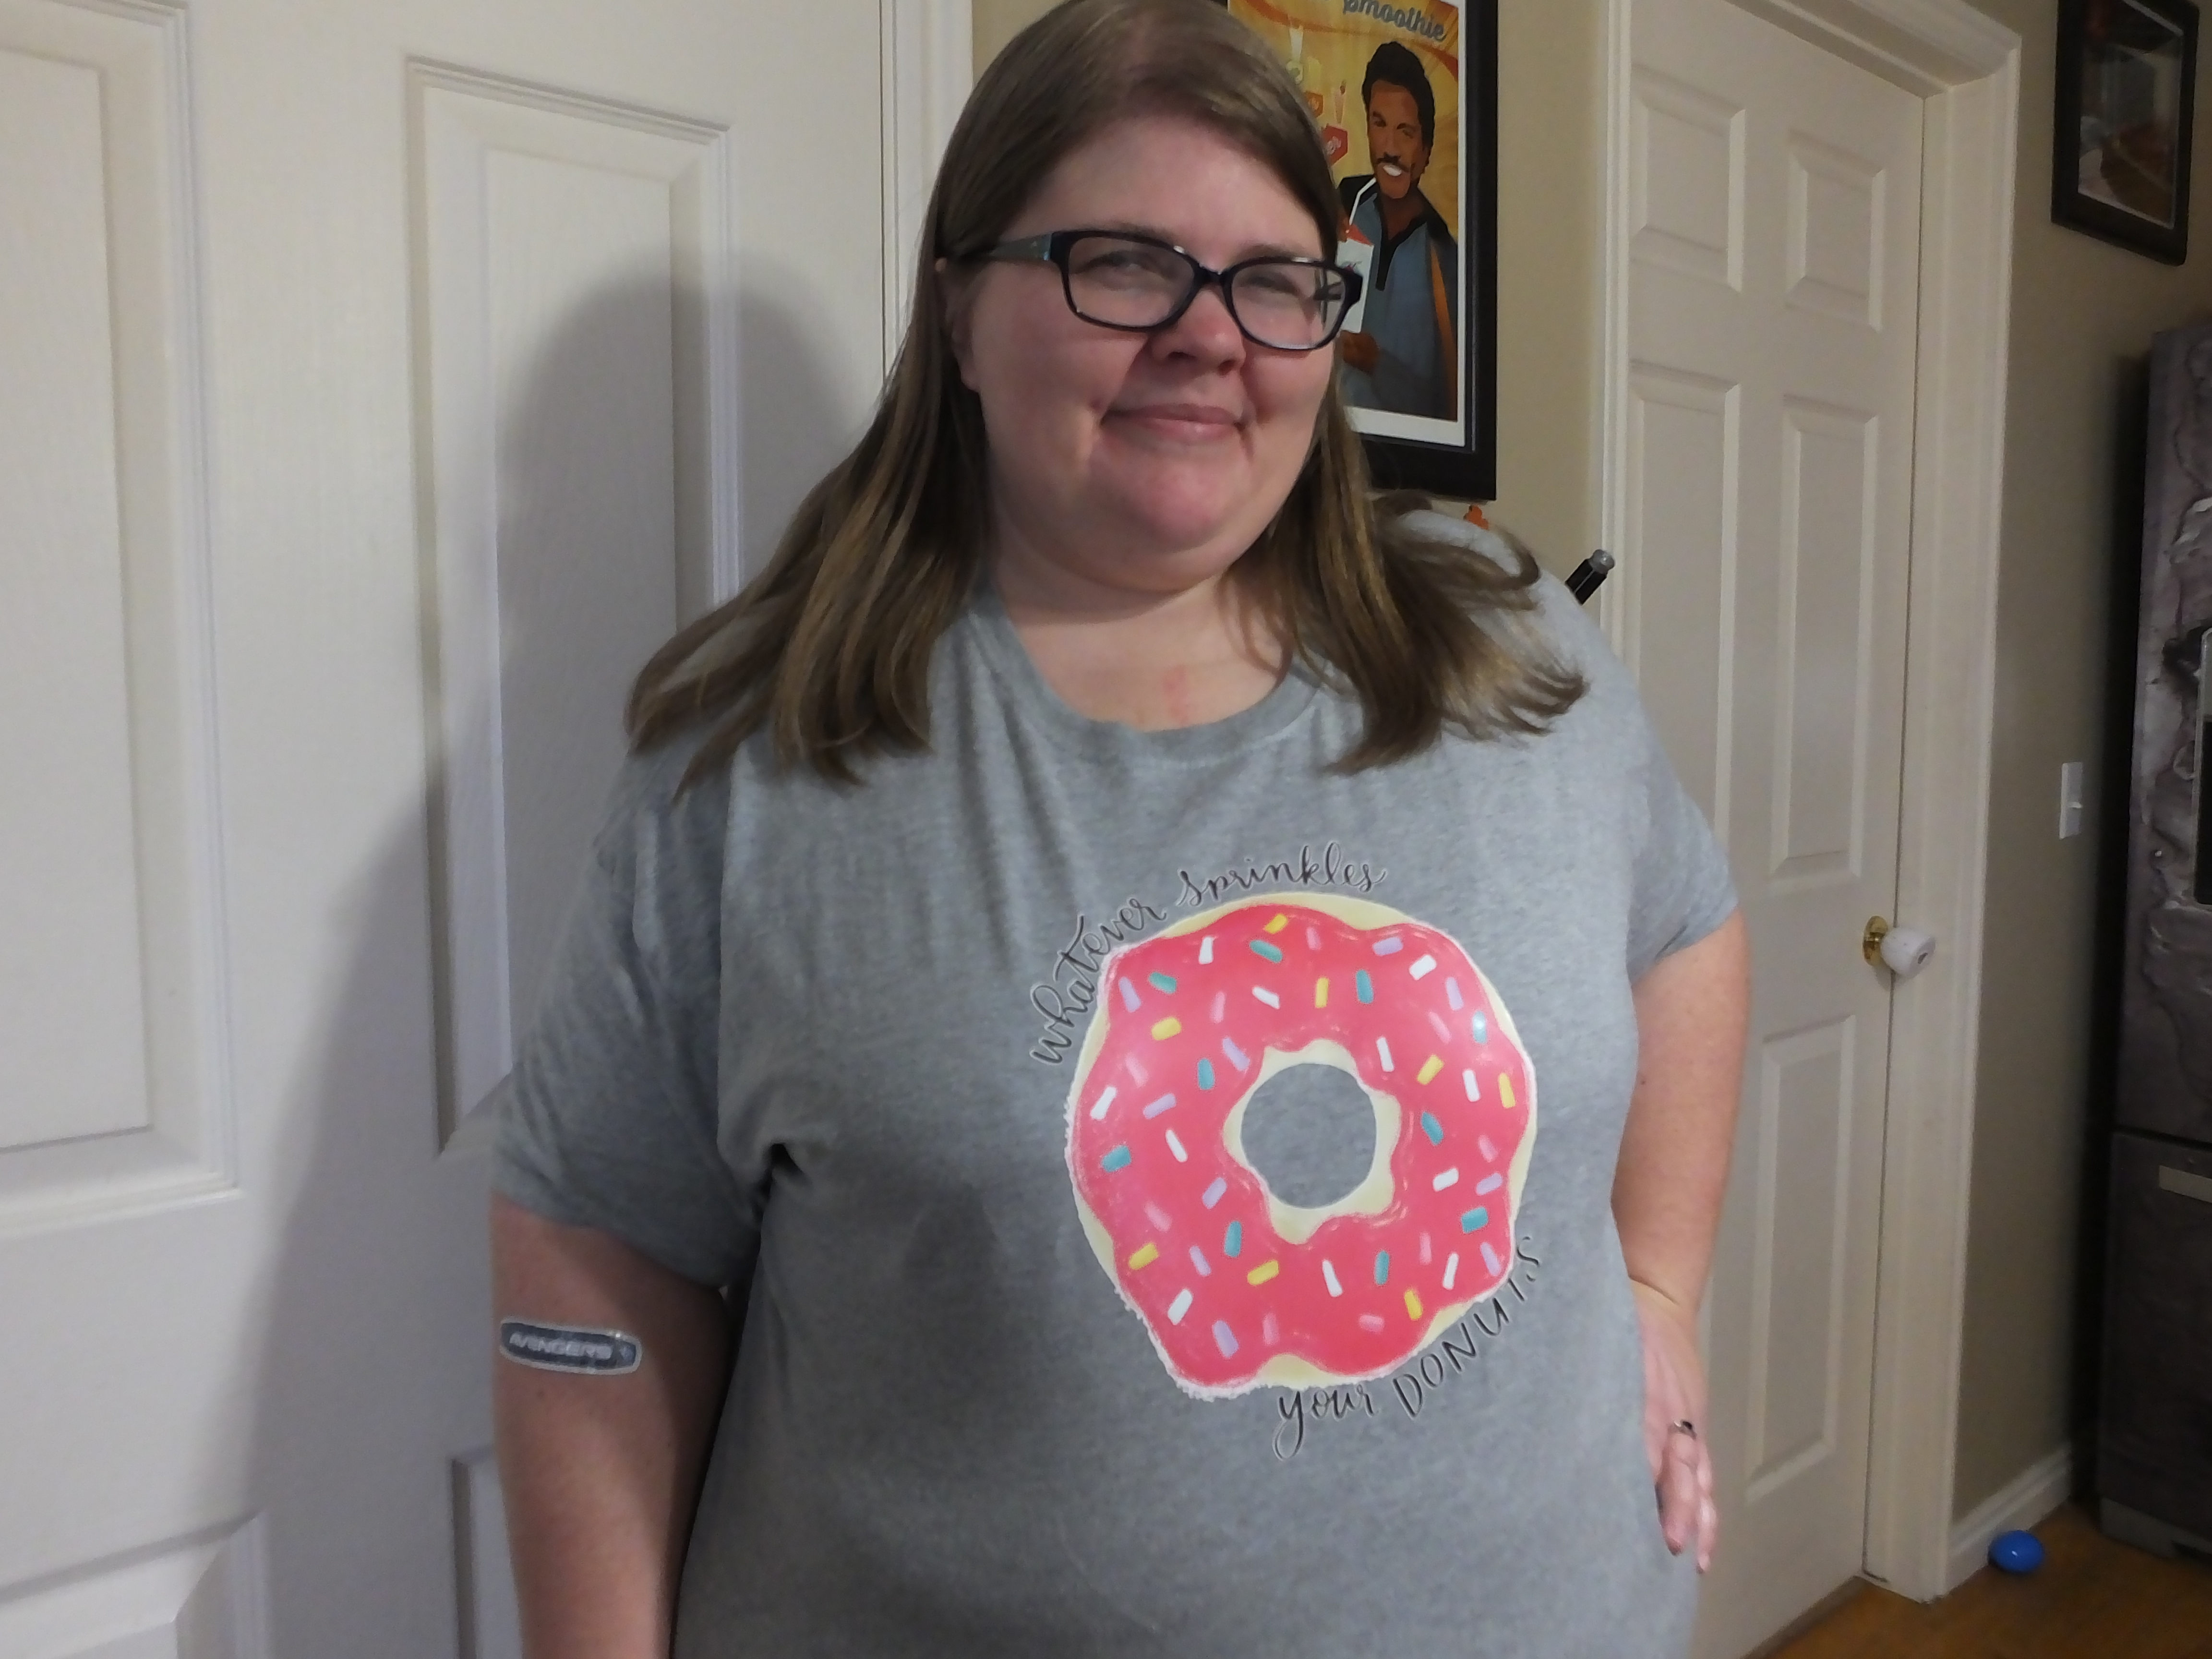 Whatever Sprinkles Your Donuts Cricut iron-on design on T-shirt